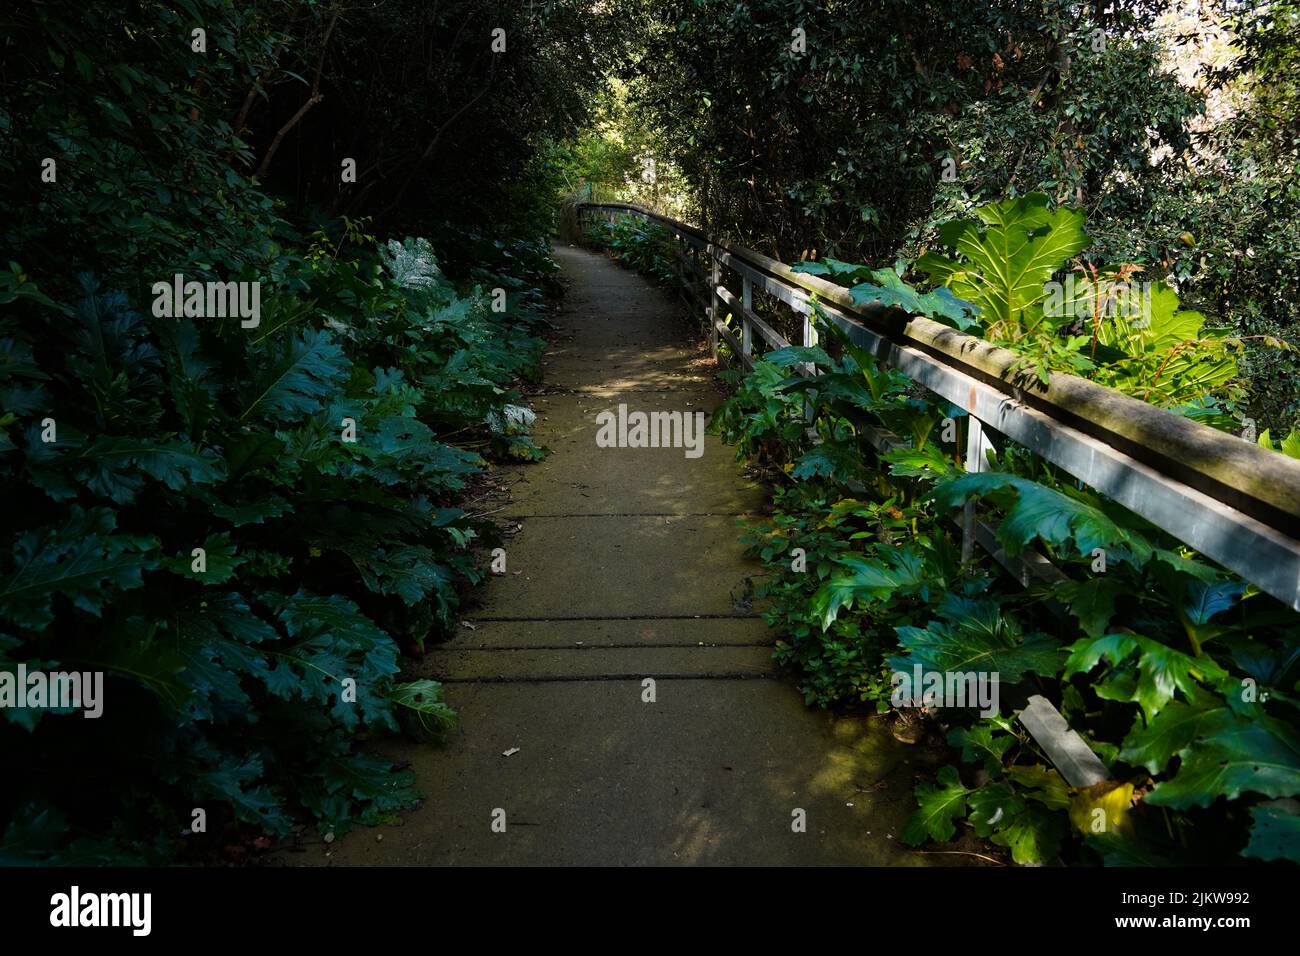 A scenic view of a pathway with a handrail between dark green plants and trees in sunlight Stock Photo